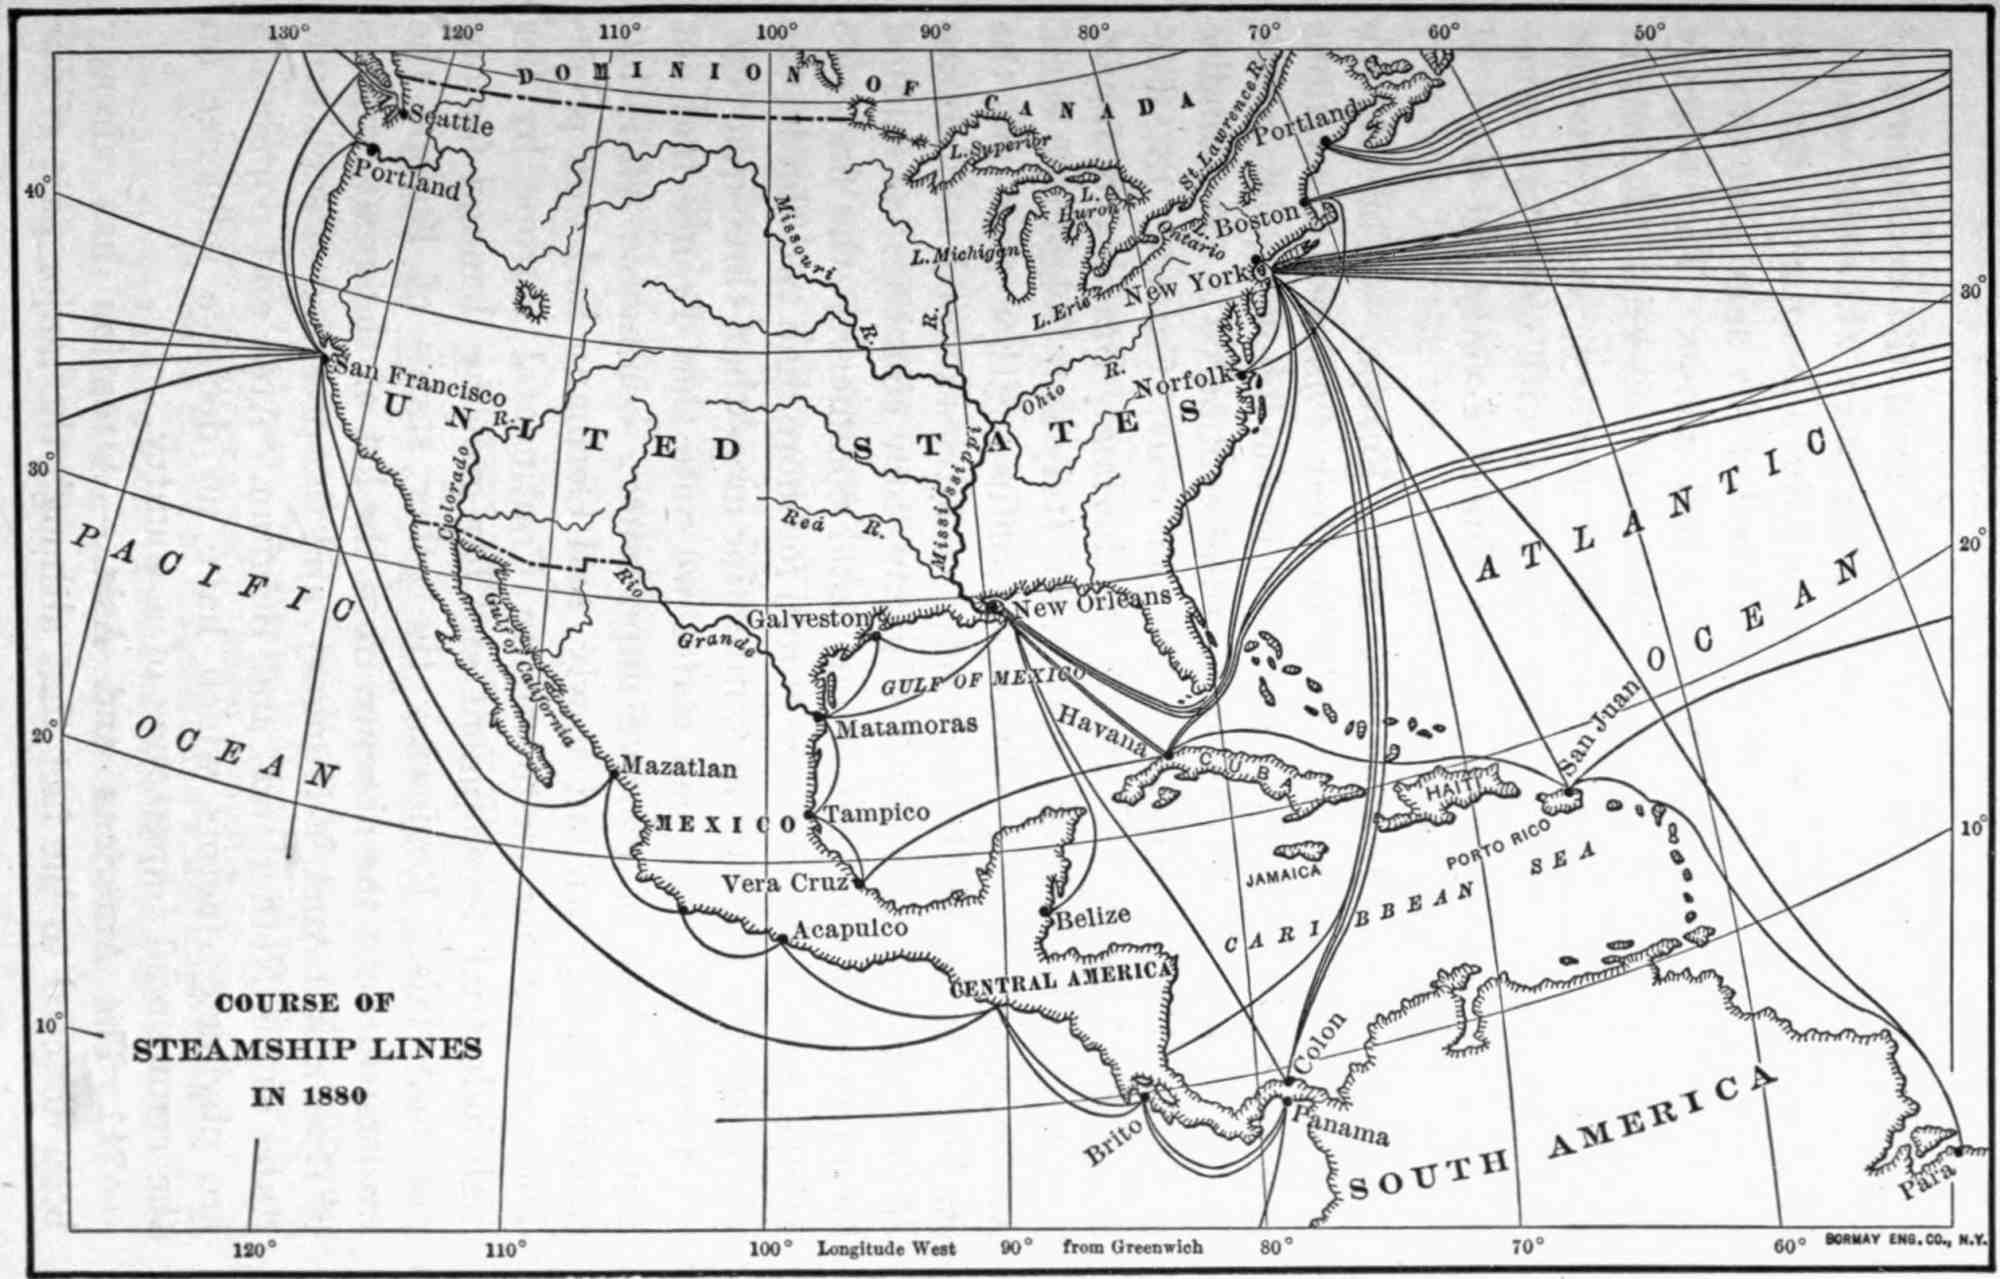 course of steamship lines in 1880